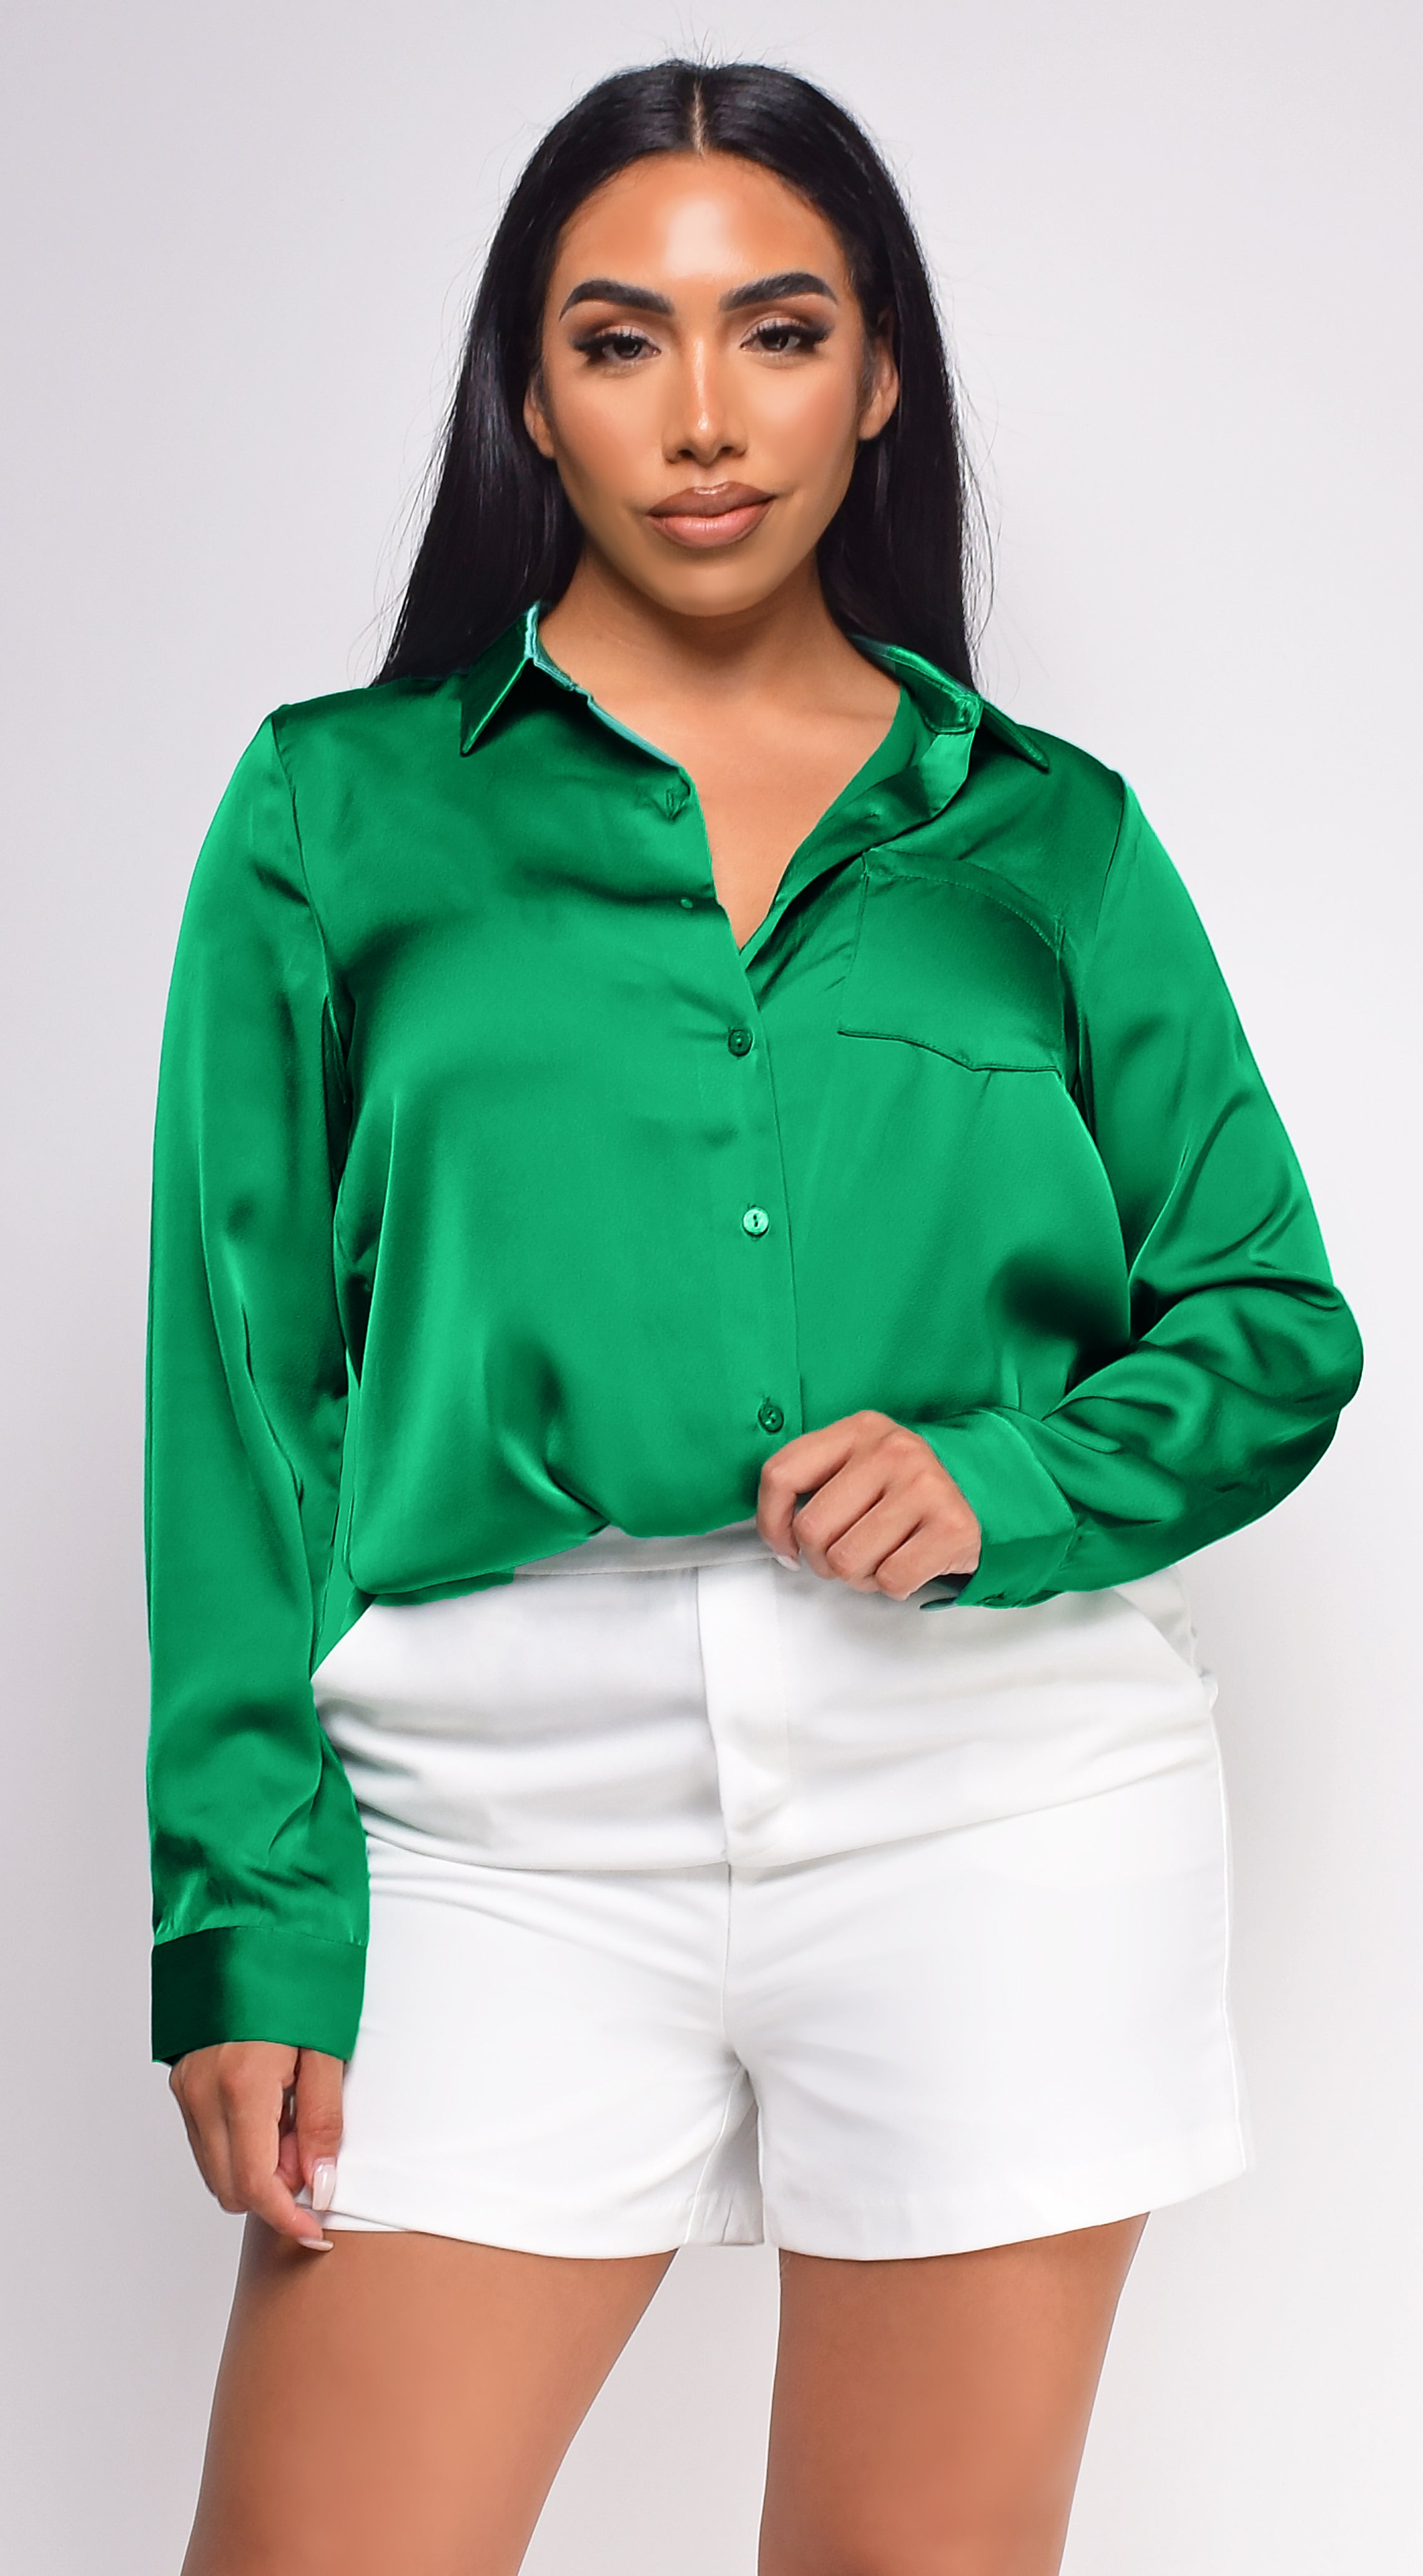 Braylee Kelly Green Satin Button Down Blouse Top